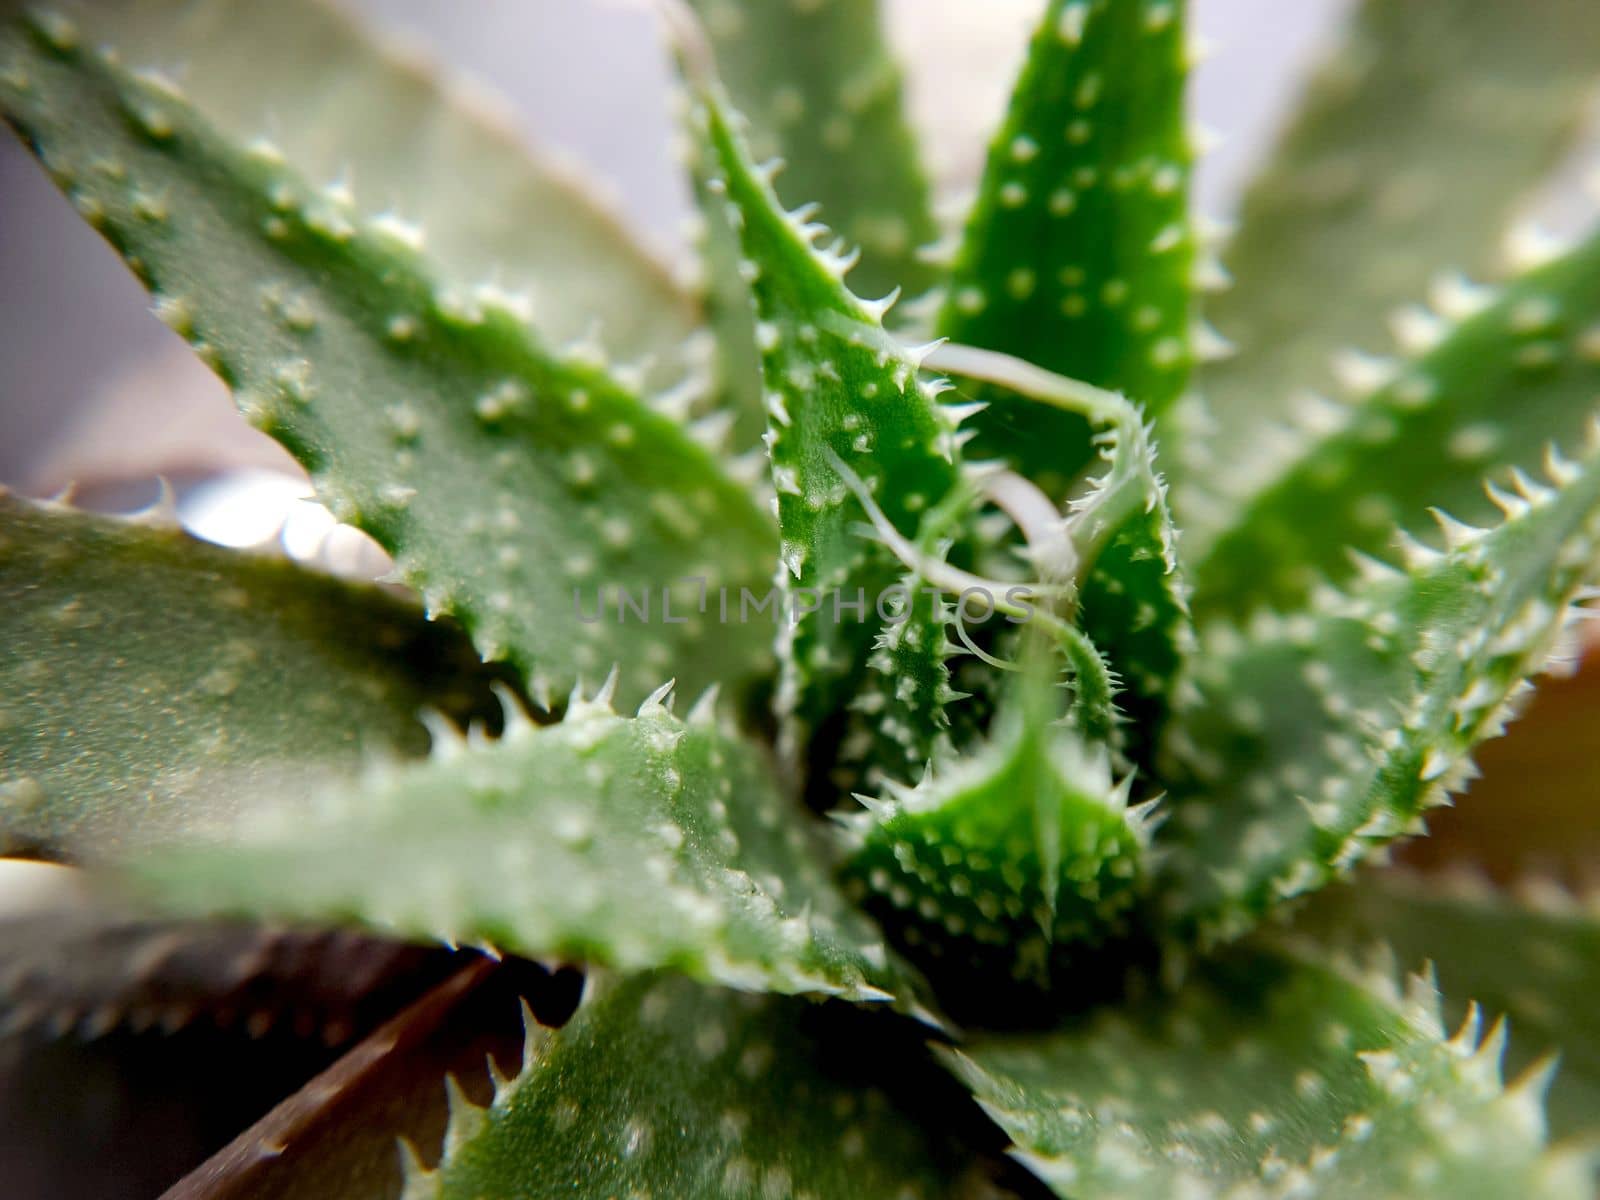 Succulent of the genus Aloe green in a pot close-up by Mastak80